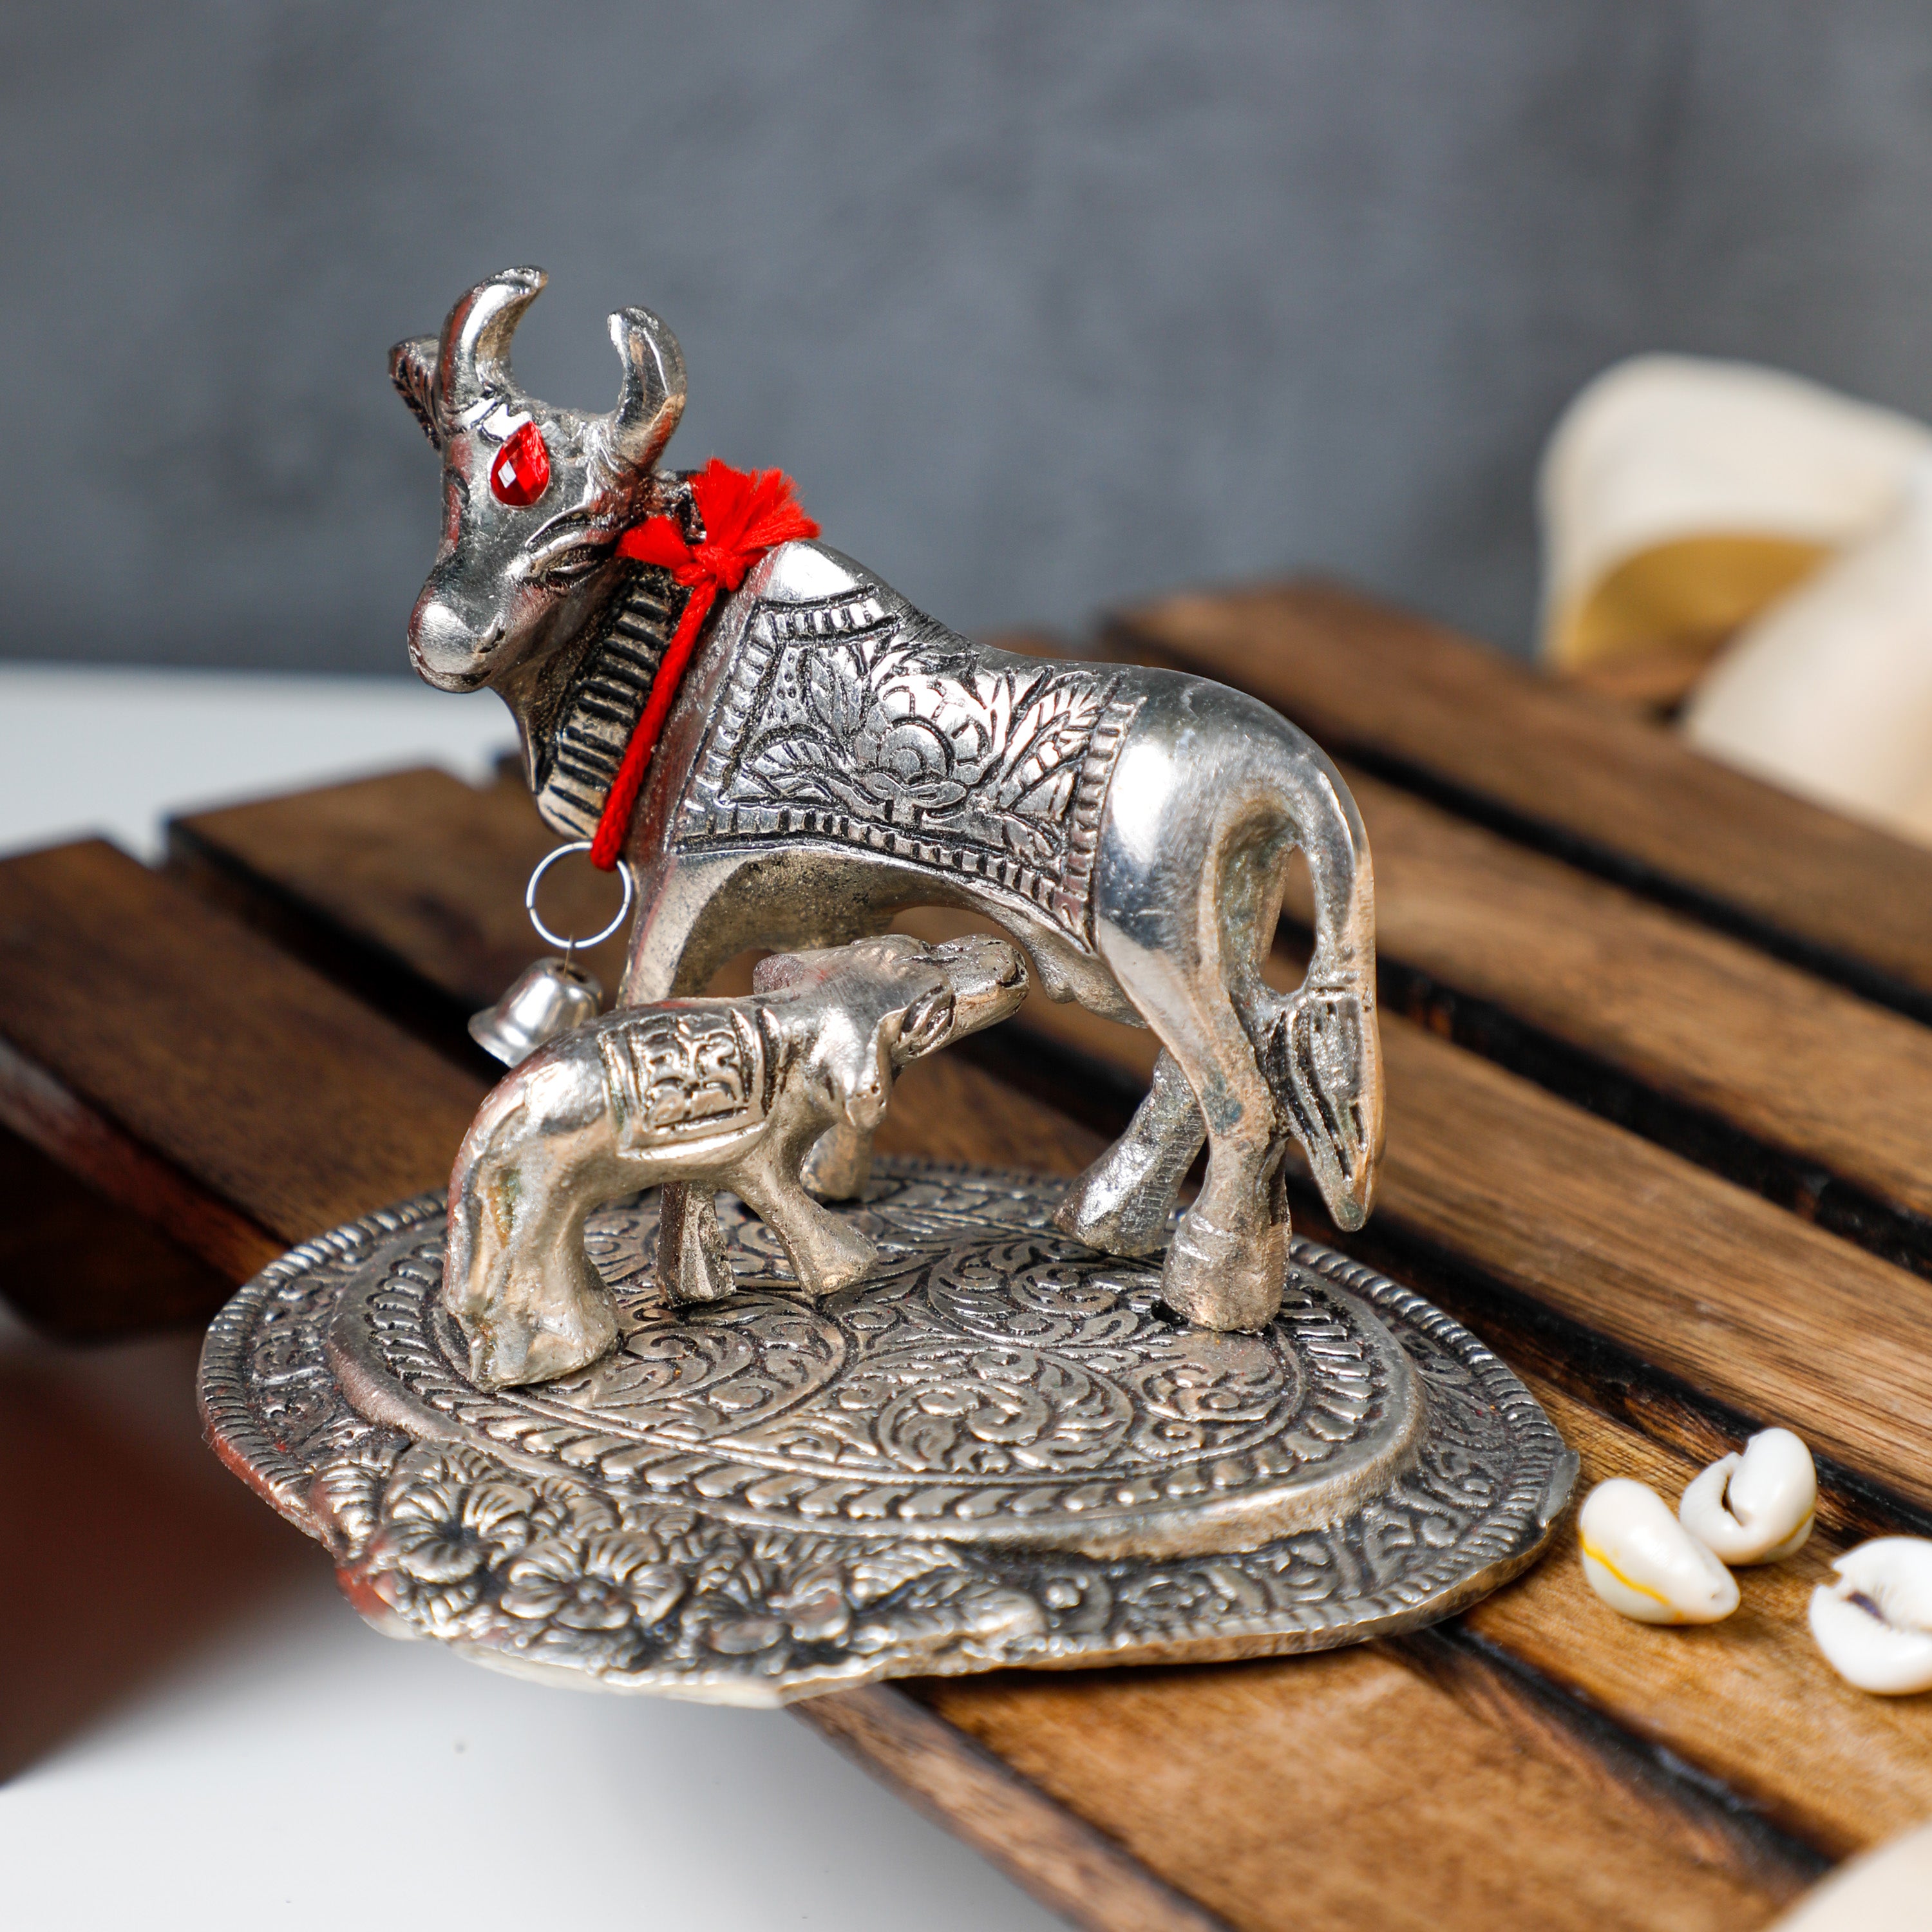 Coated in Silver this figurine adds charm to any space you introduce it to. 